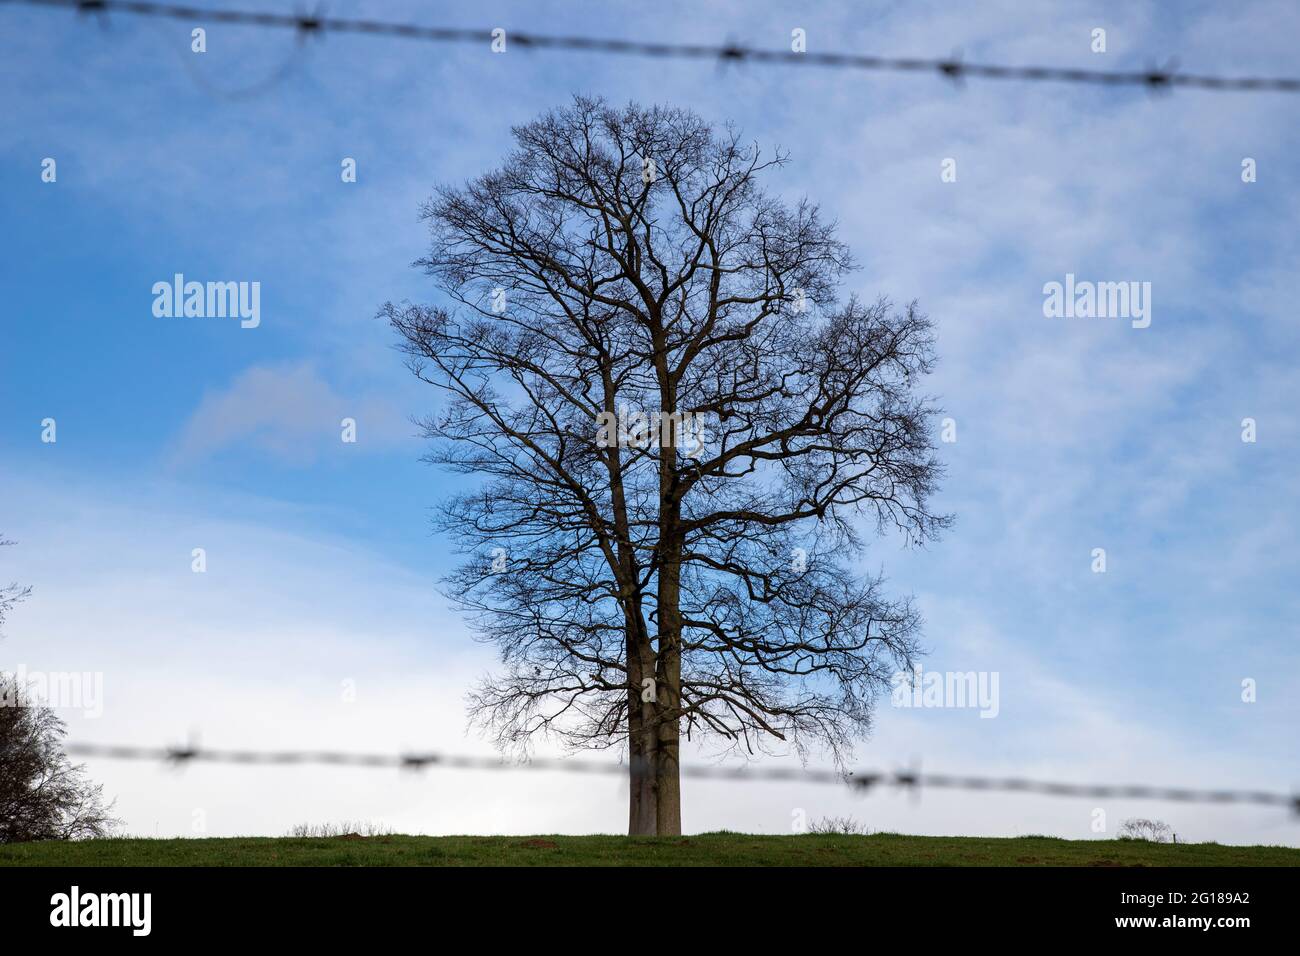 silhouette of e tree behind barbed wire Stock Photo